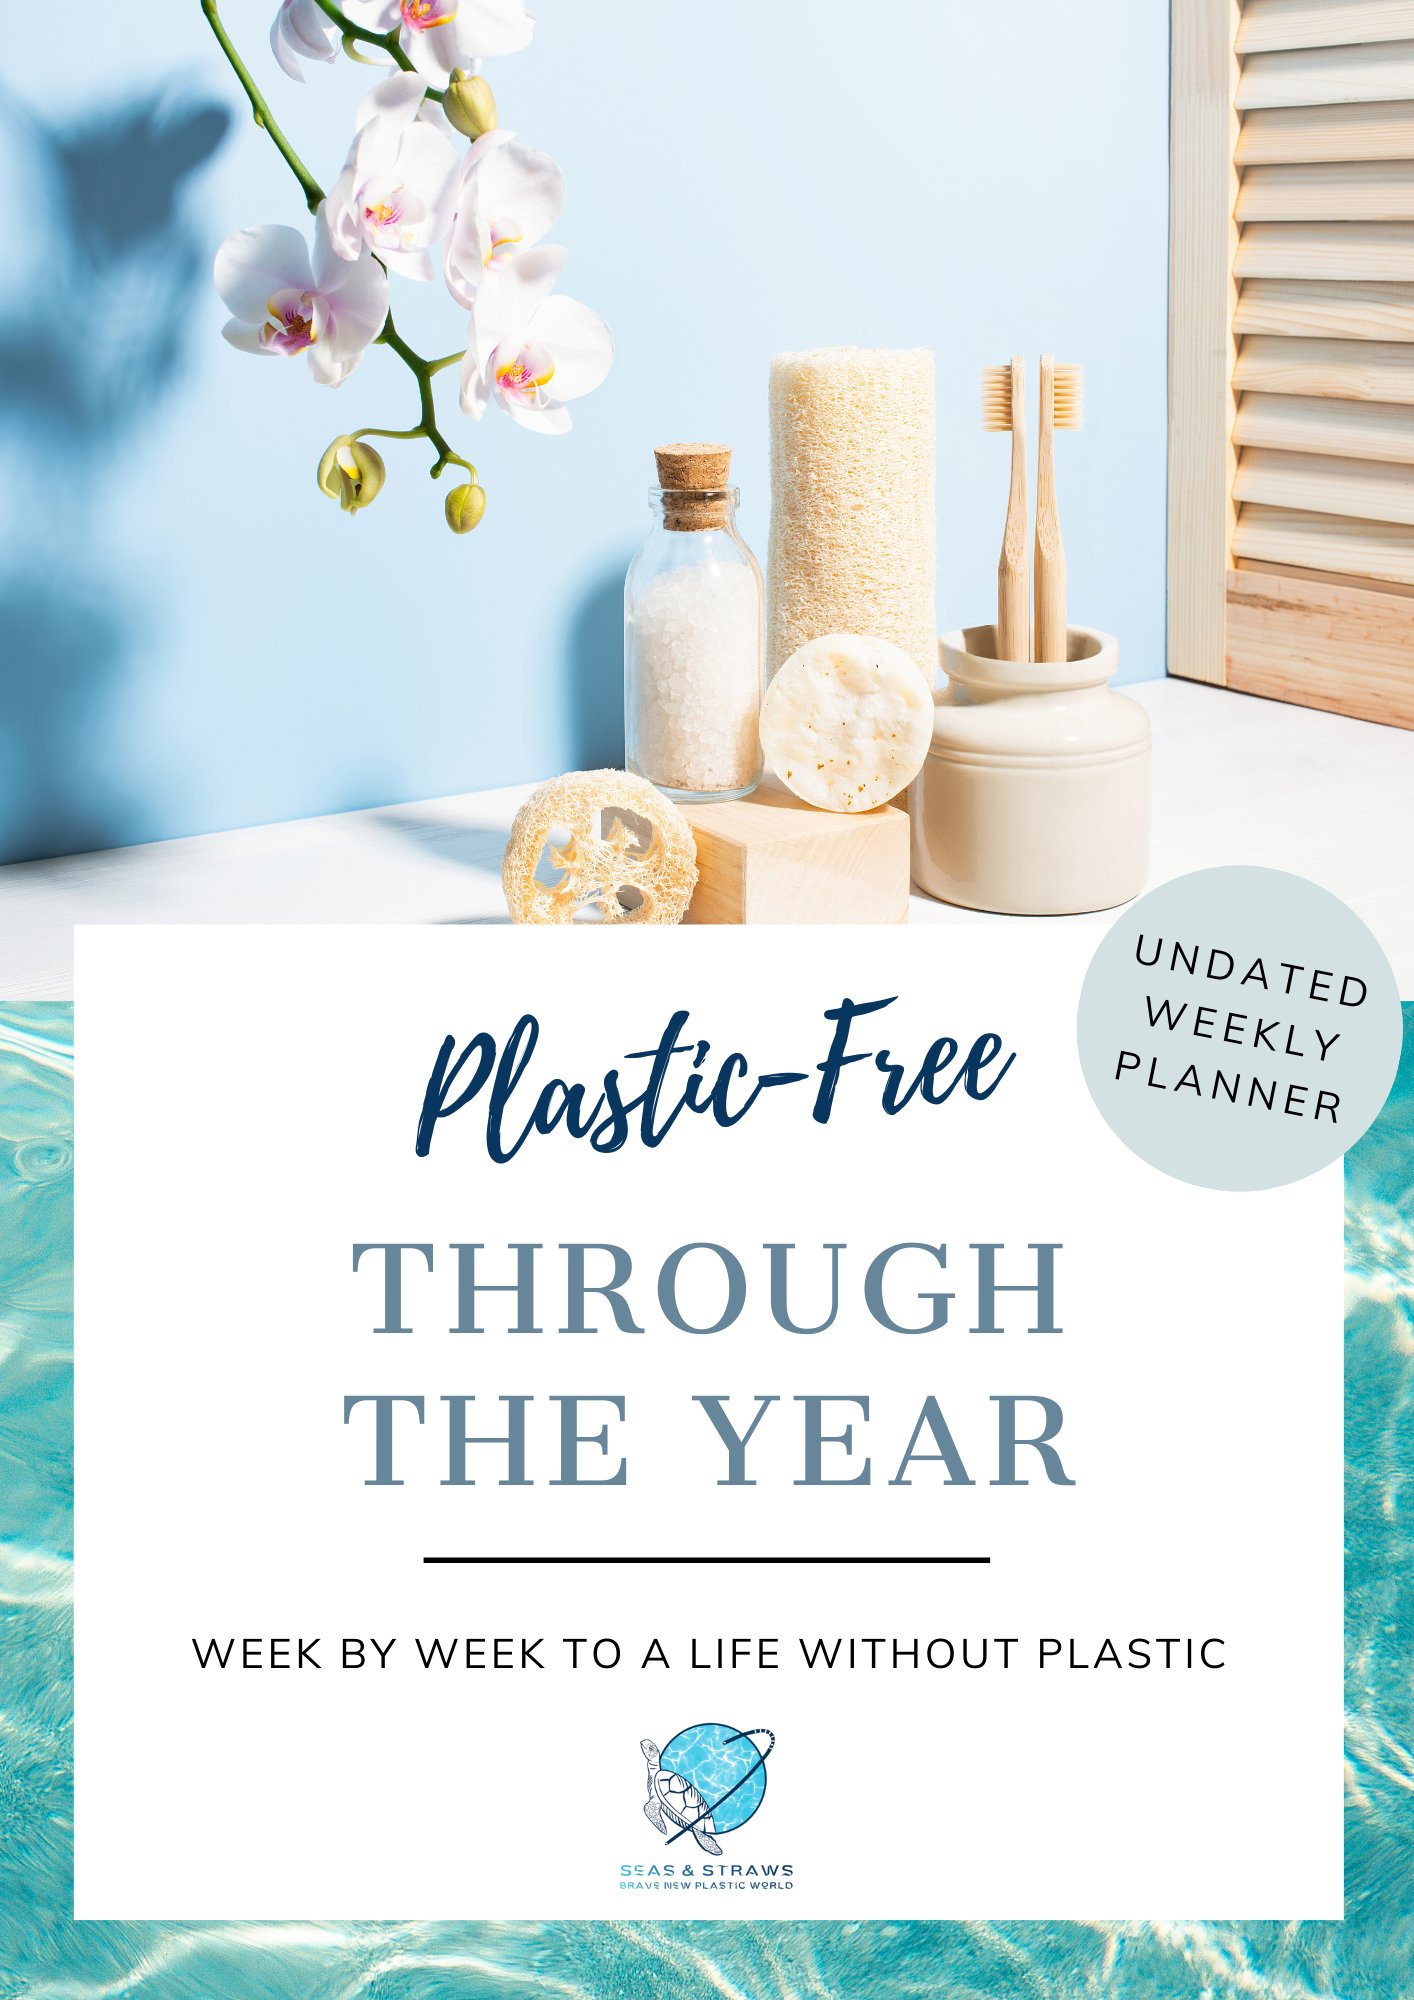 Plastic-free through the year - Page1